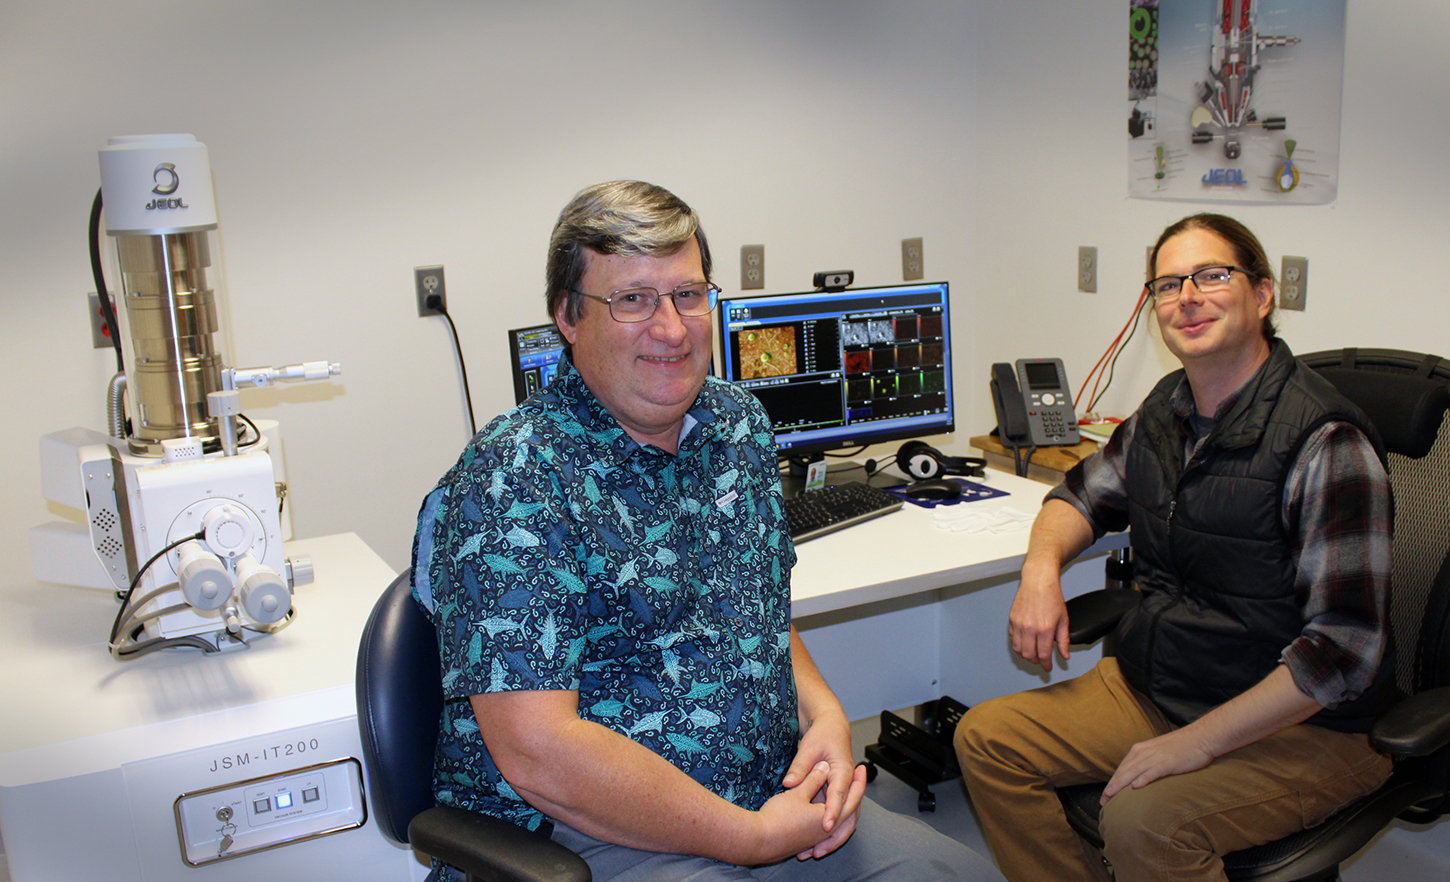 Dr. Steve Morton (left) and Andrew Shuler (right) with the IT200 at NOAA.